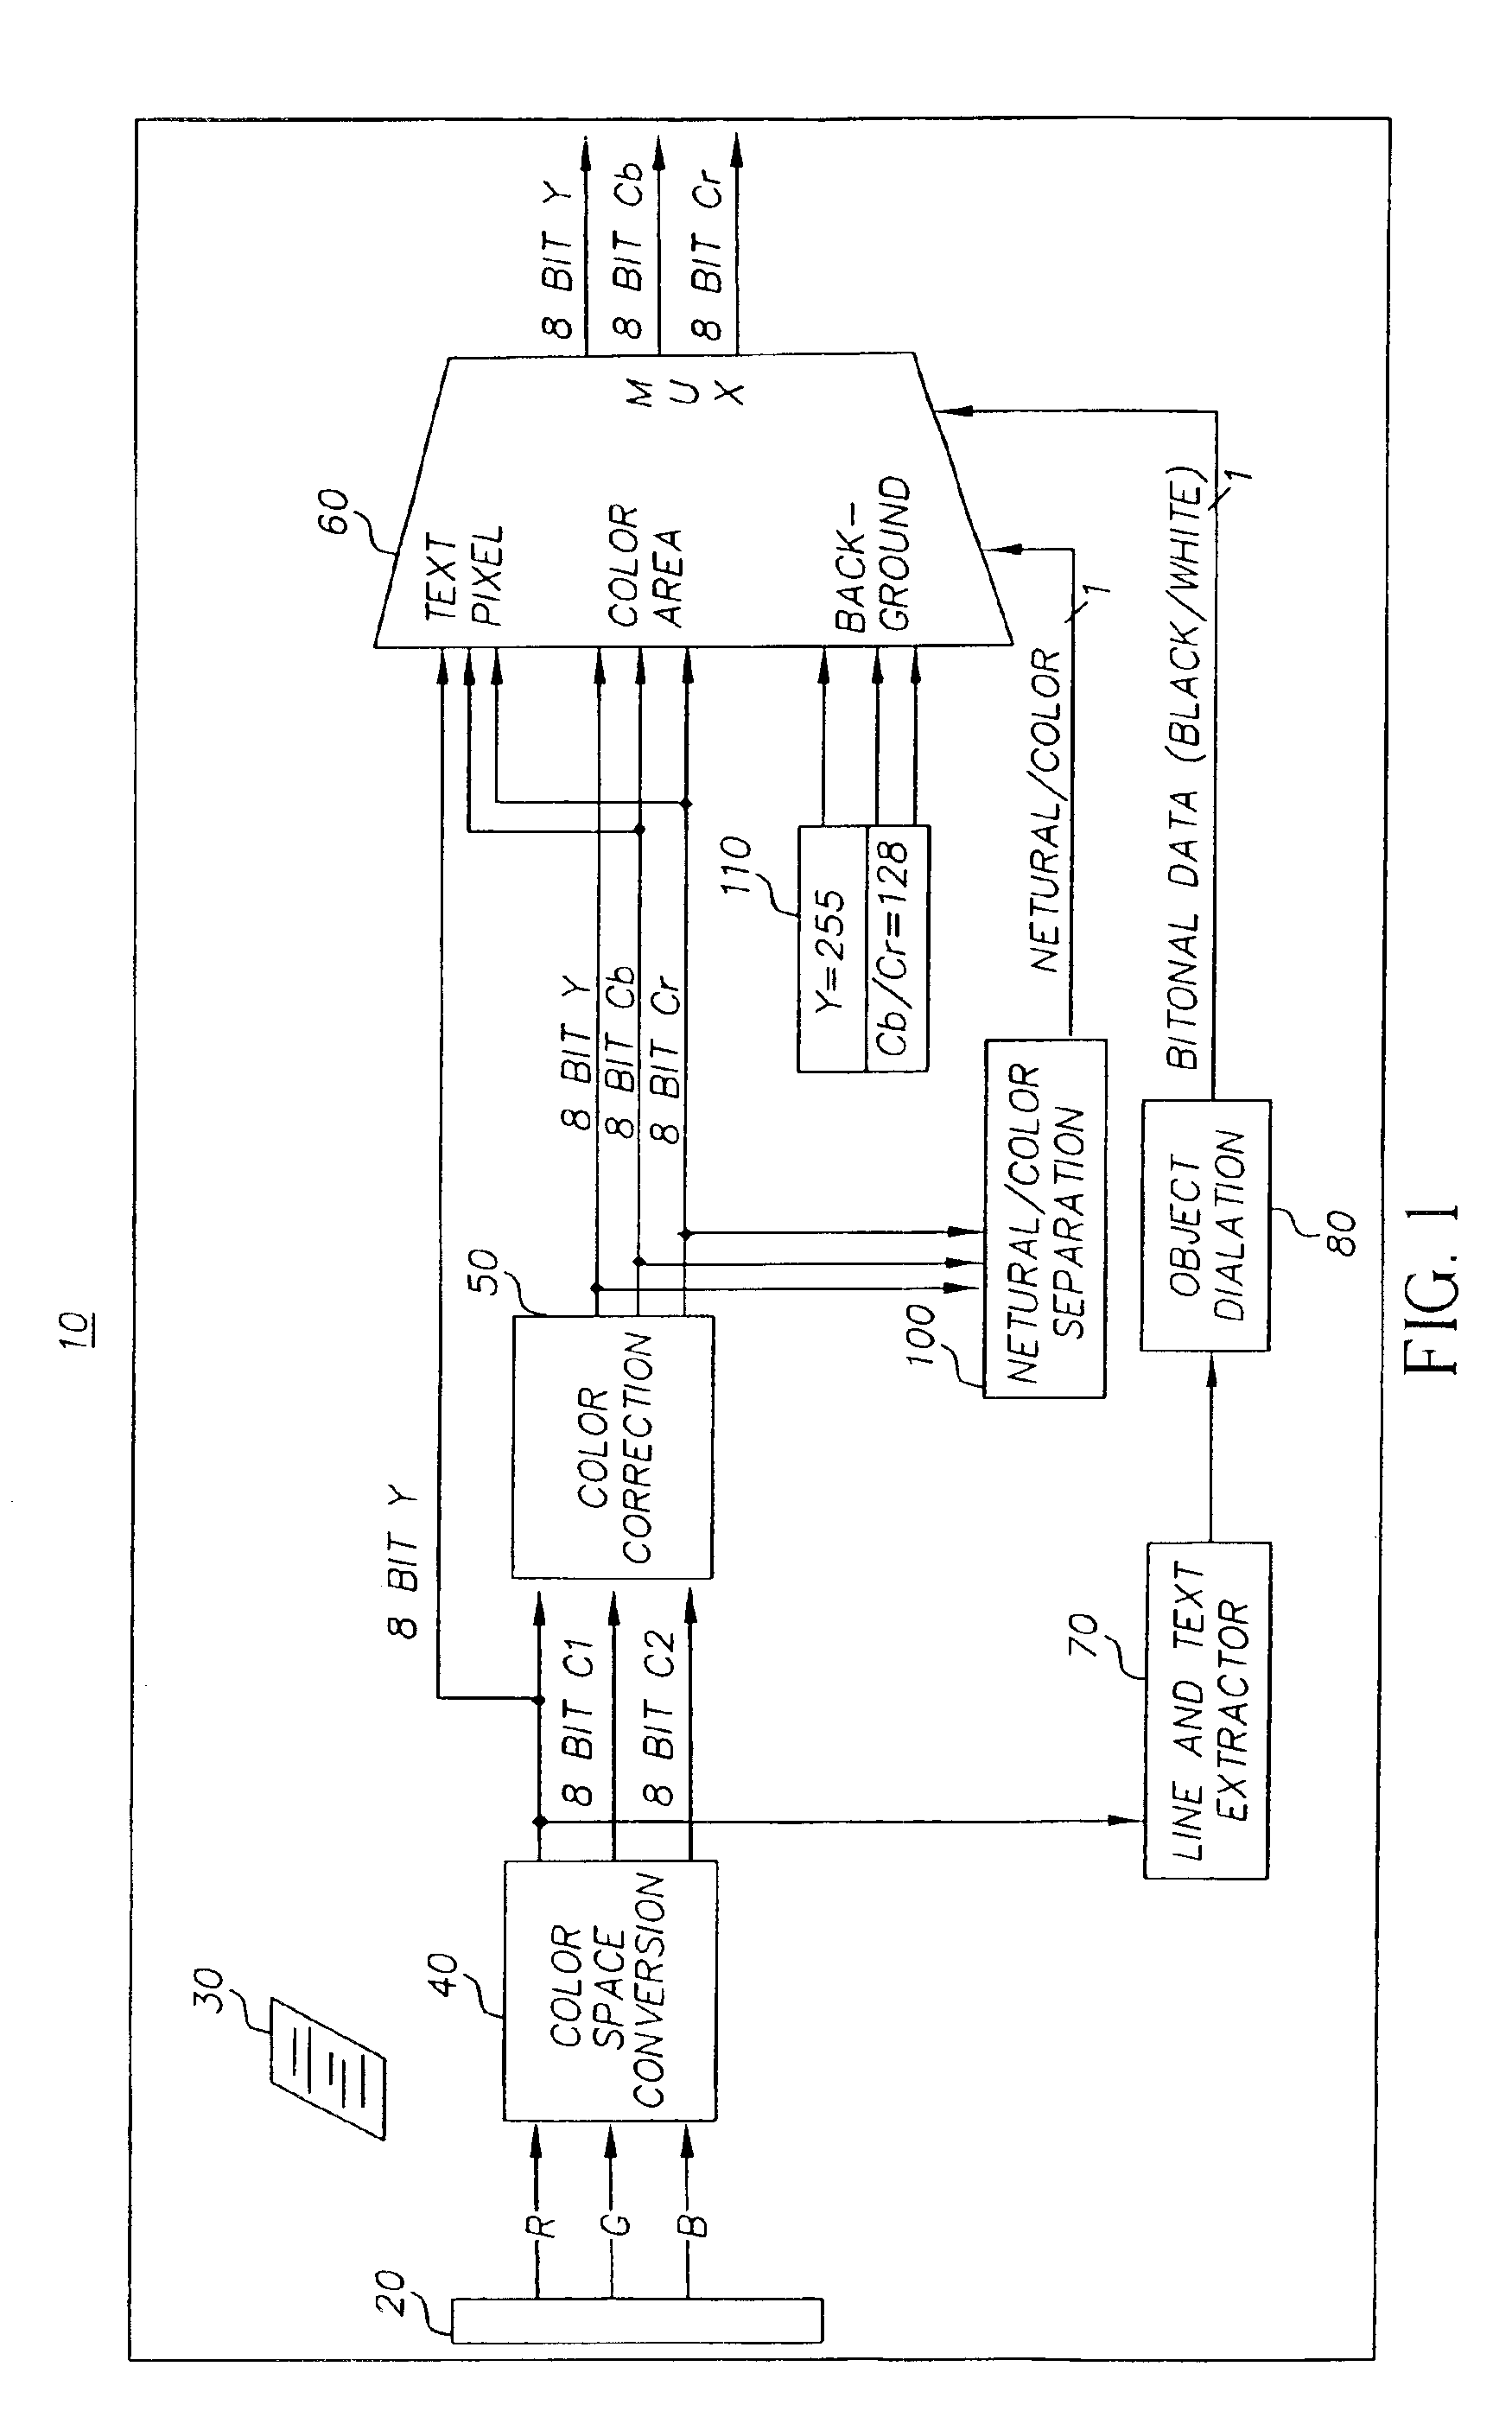 High-speed scanner having image processing for improving the color reproduction and visual appearance thereof